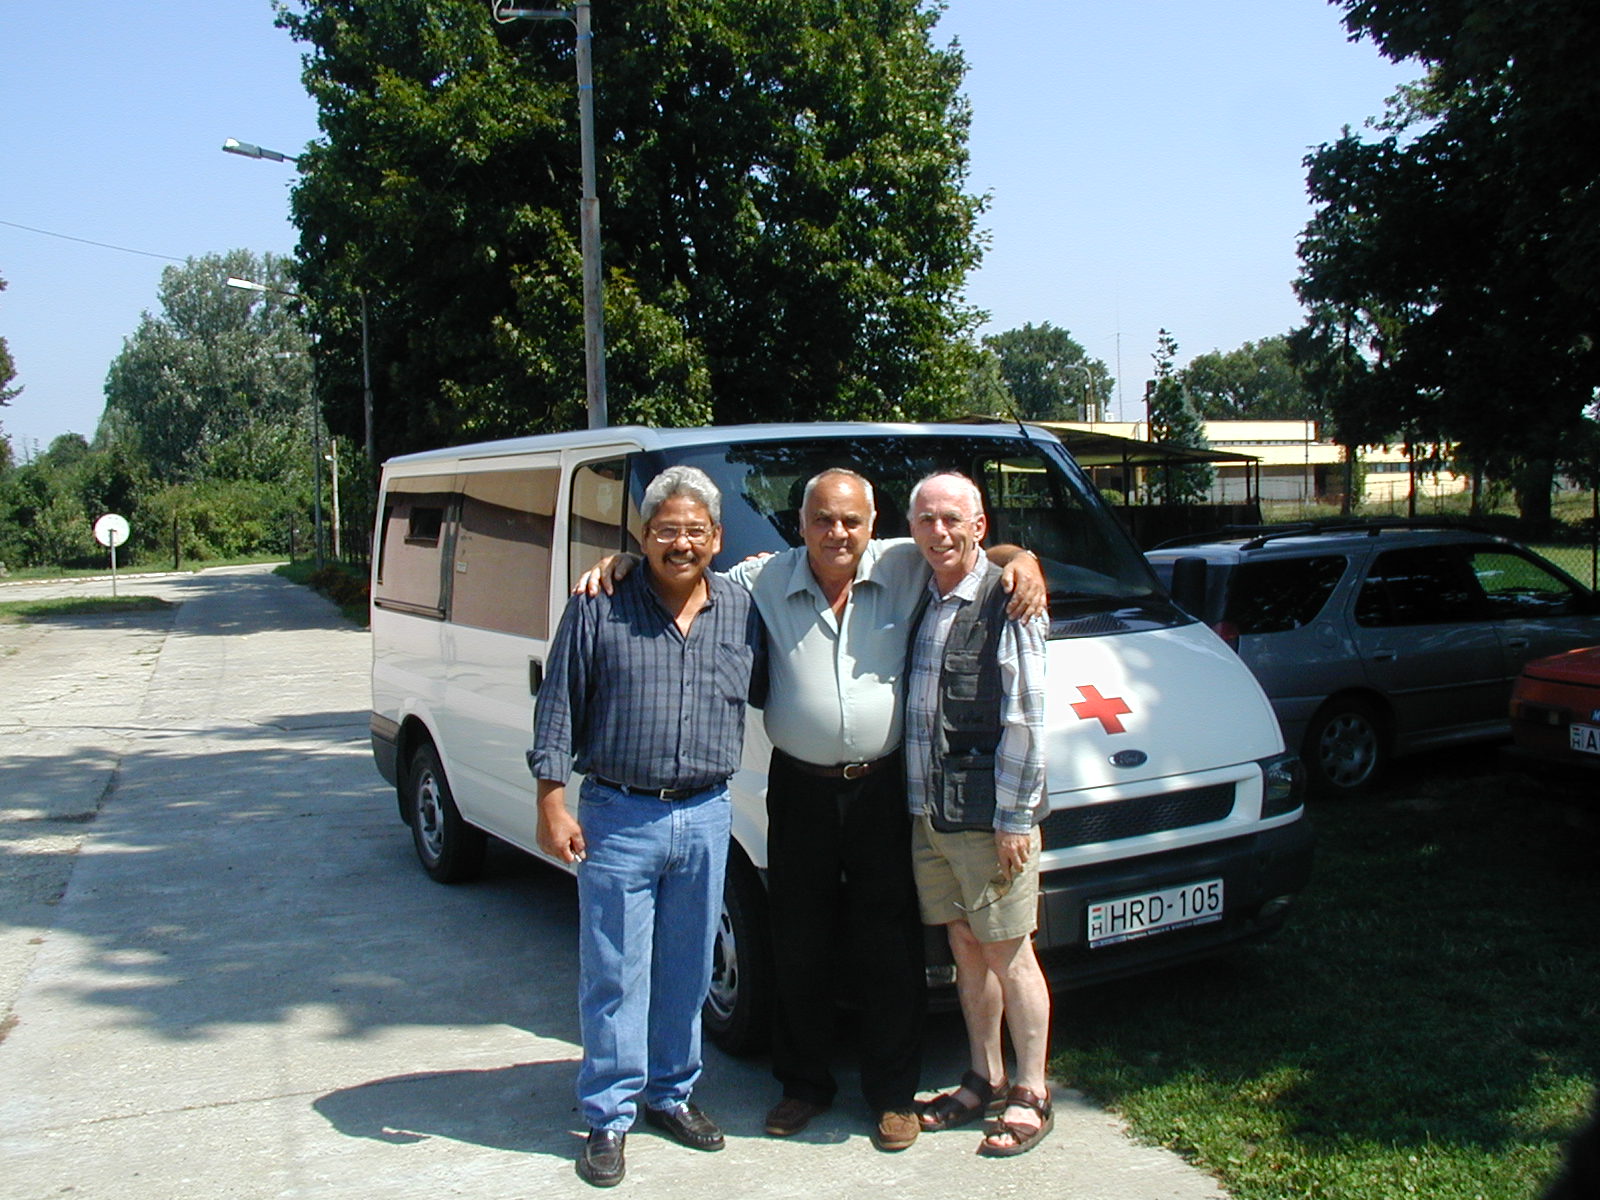 Frank Mendiola, Dr. Labady and Fr. John standing in front of the bus provided by Hands that Help.